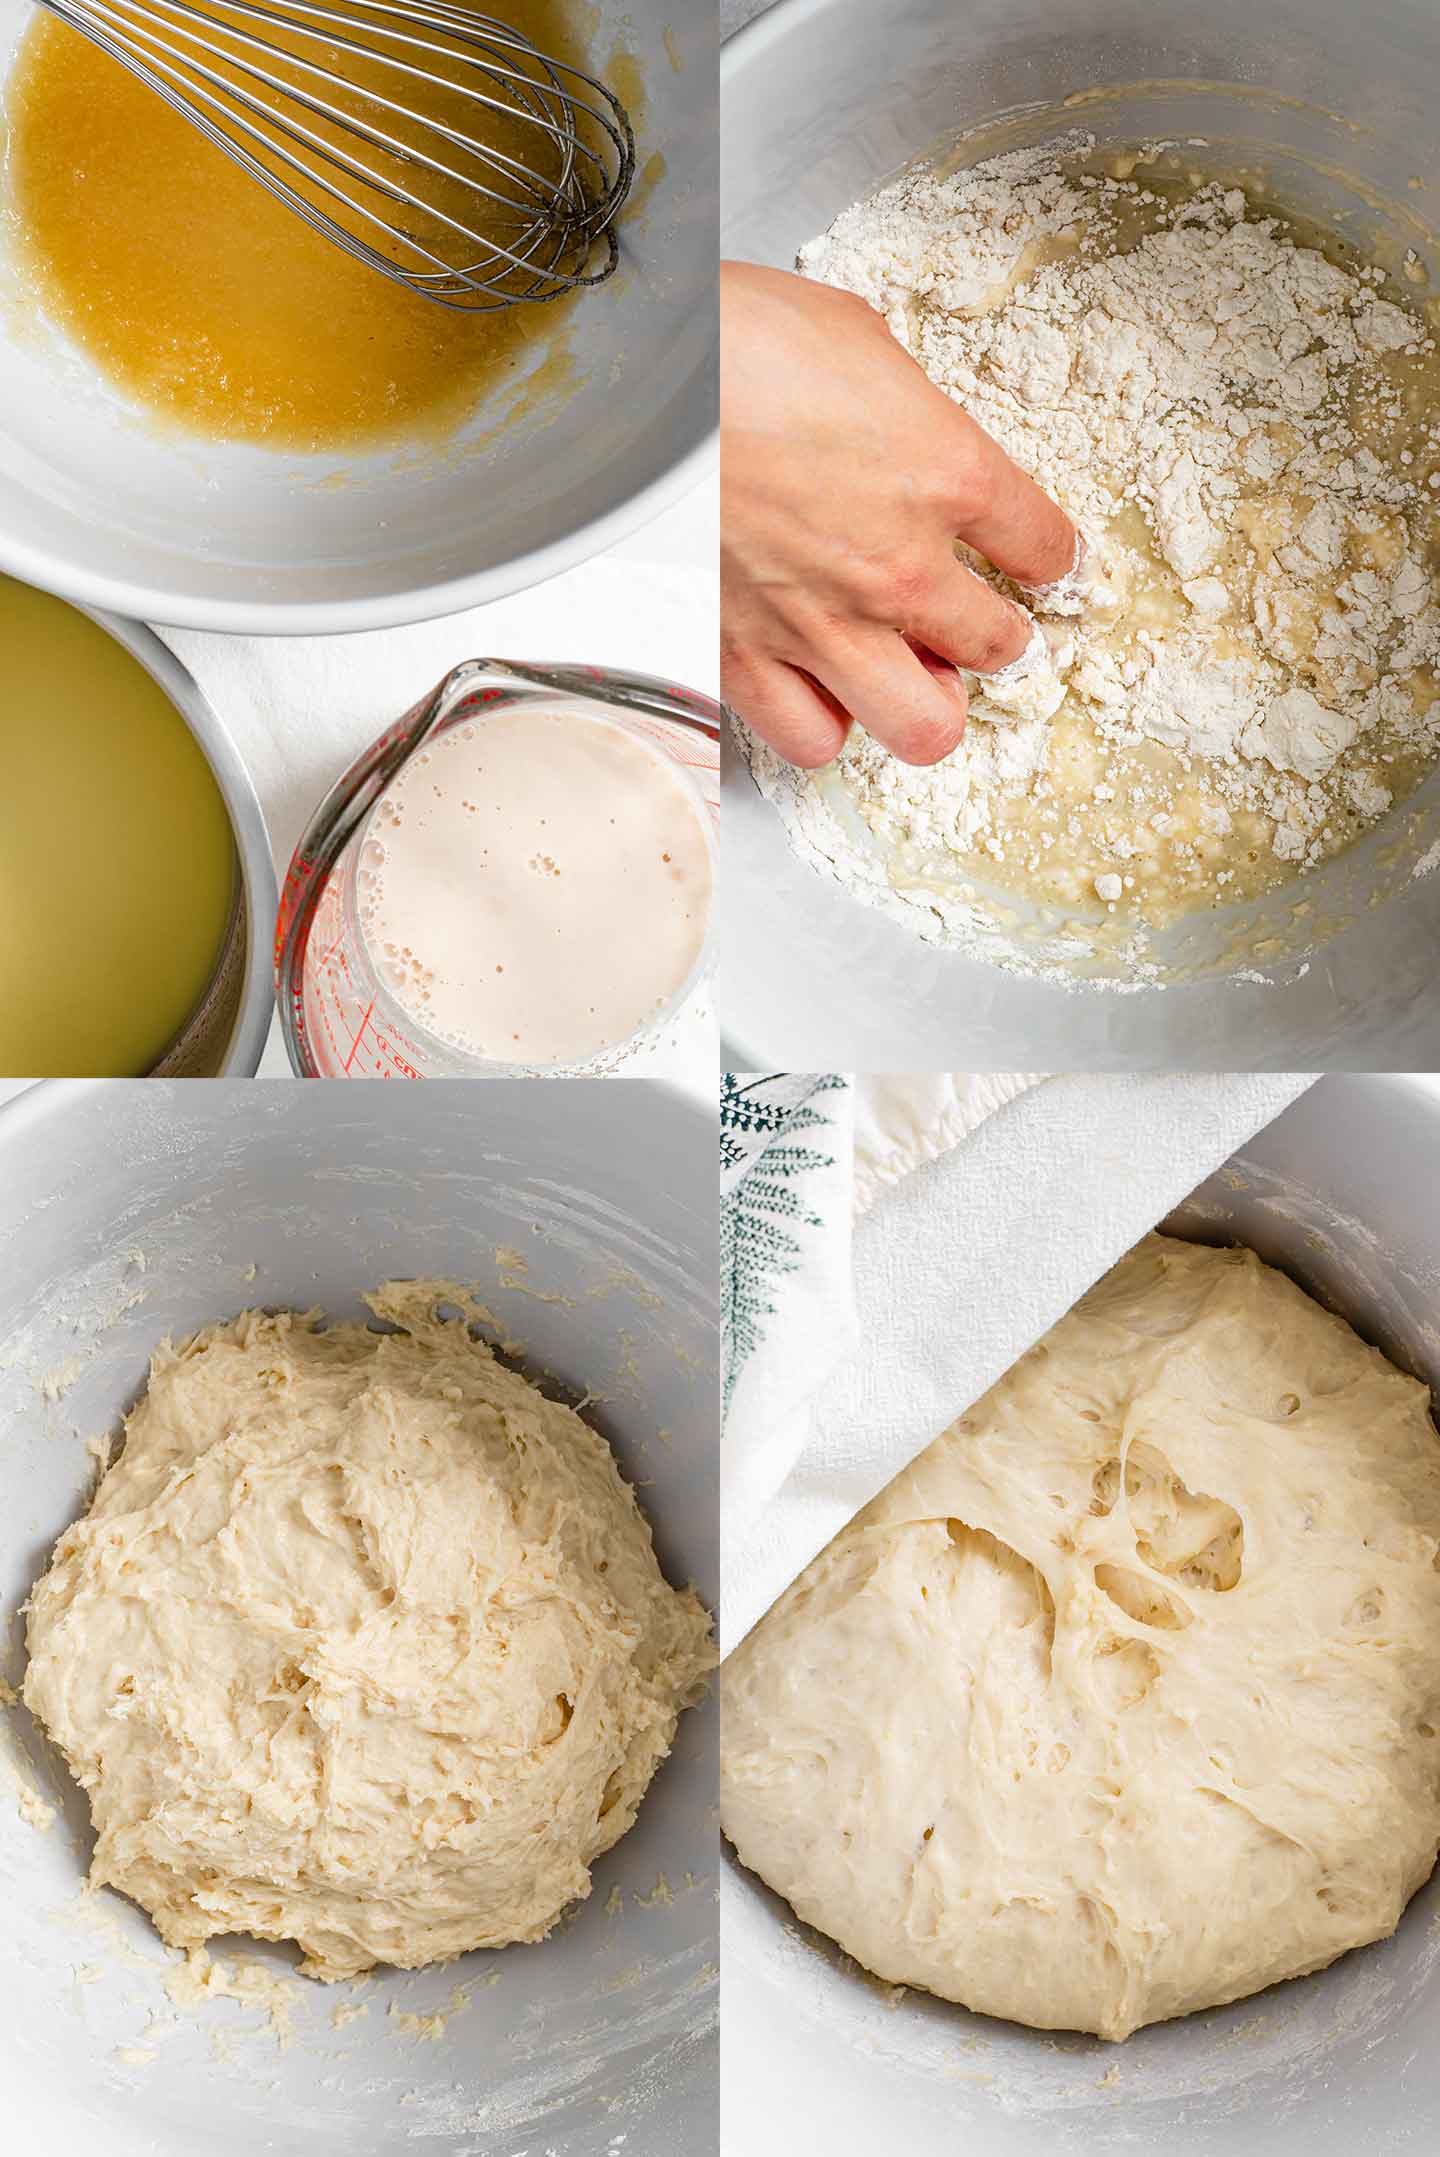 Top down grid of four process photos. The first shows a frothy yeast mixture, melted butter with milk, and an applesauce mixture. In the second, fingers combine the dough ingredients. In the third and fourth, the dough is shown before and after it rises. 